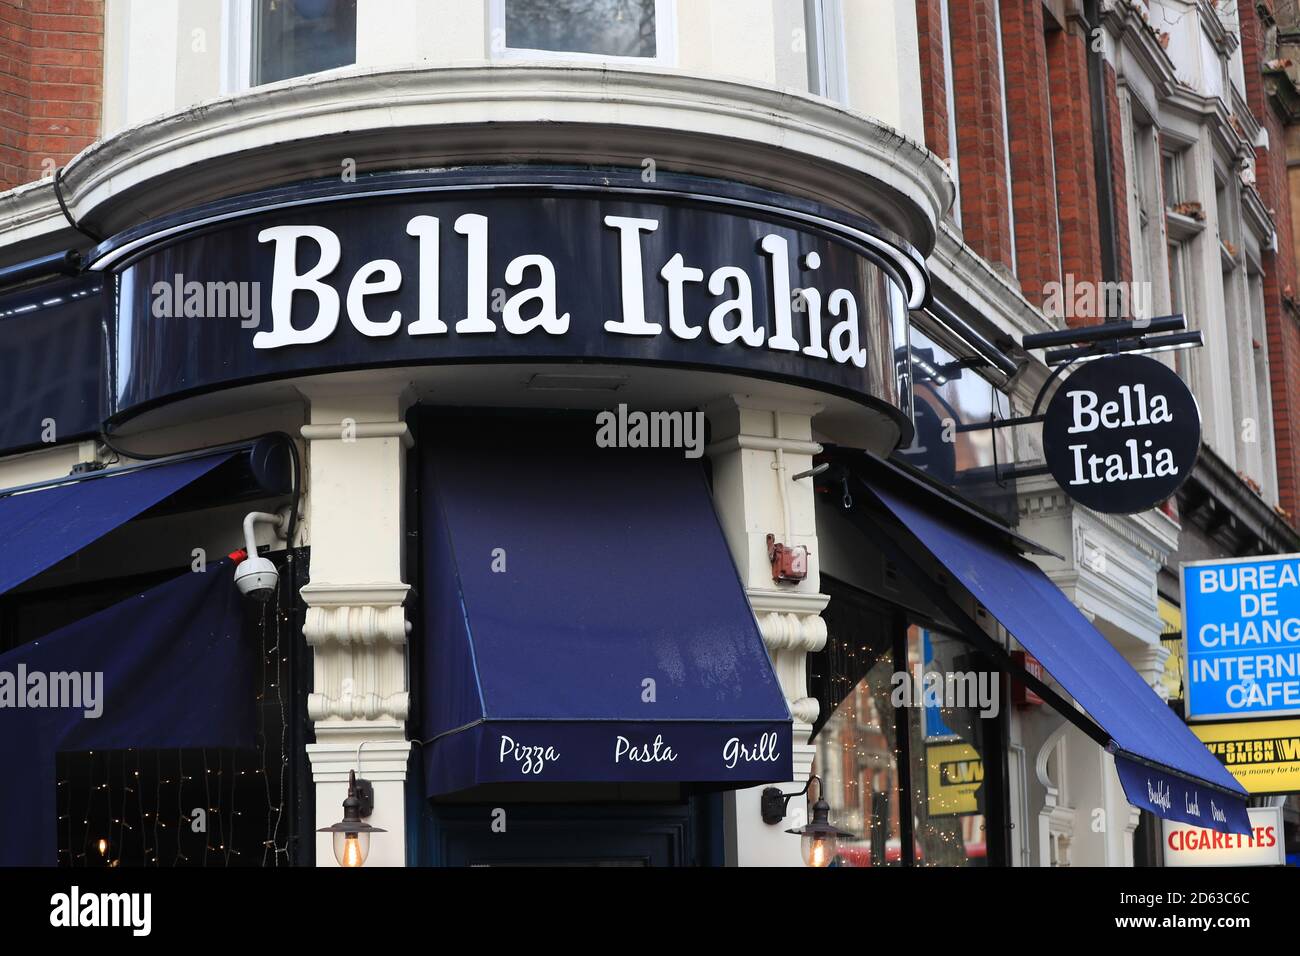 A view of a sign for a Bella Italia restaurant in London. Stock Photo